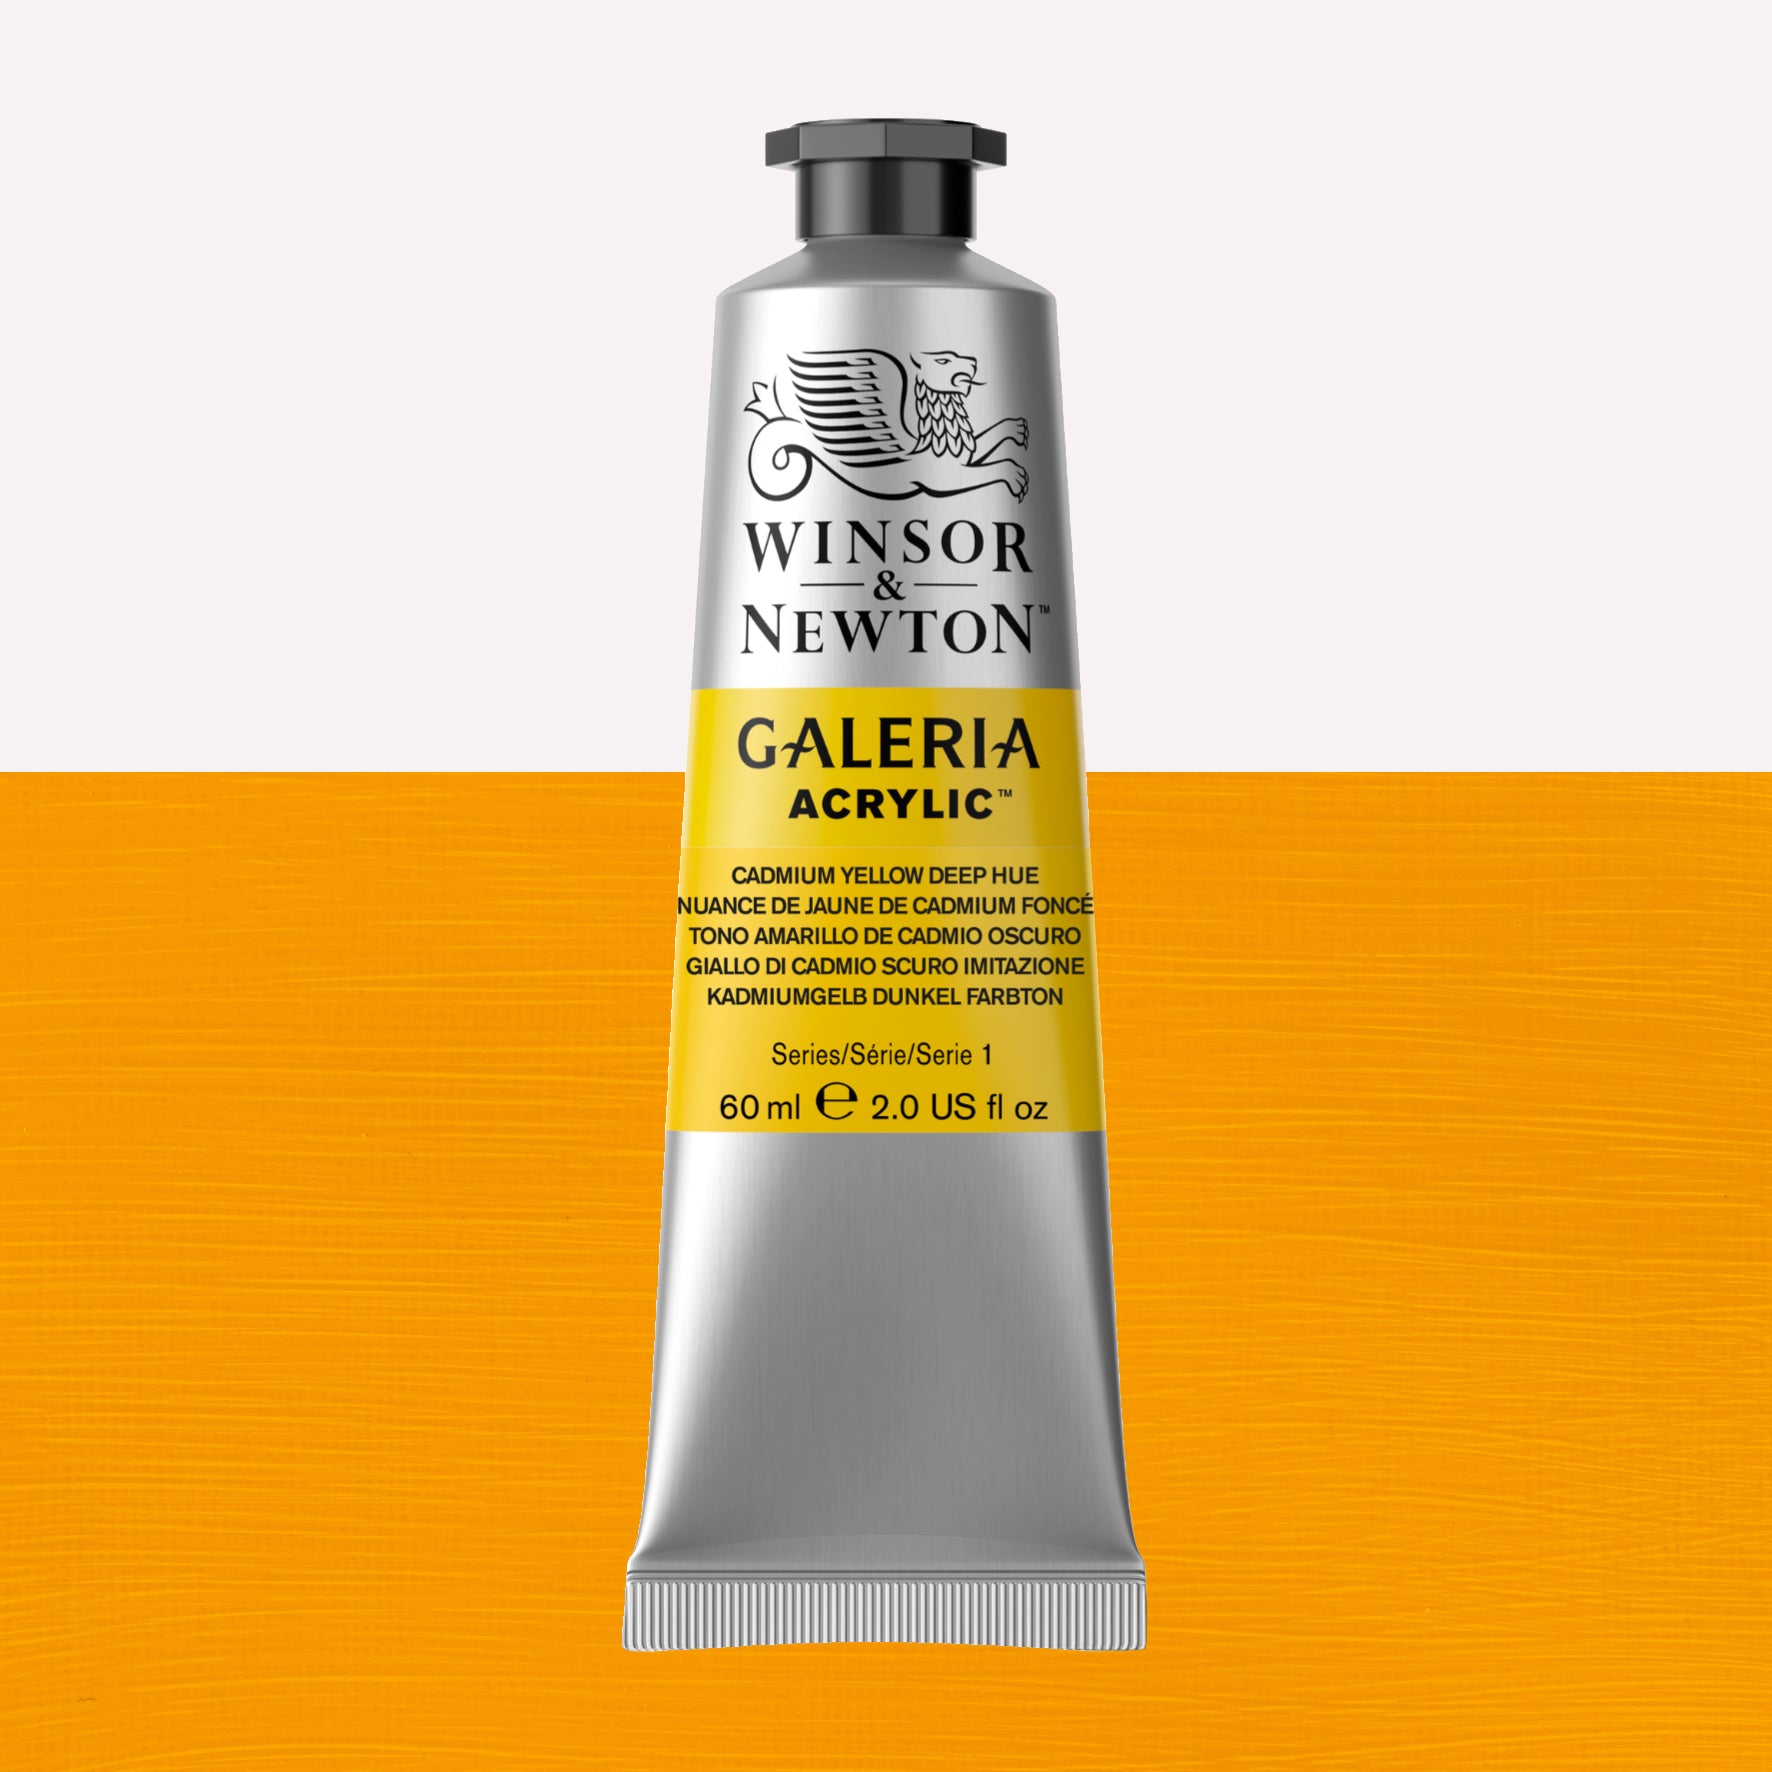 A 60ml tube of vibrant Galeria Acrylic paint in the shade Cadmium Yellow Deep Hue . This paint, made by Winsor and Newton, is packaged in a silver tube with a black lid. 